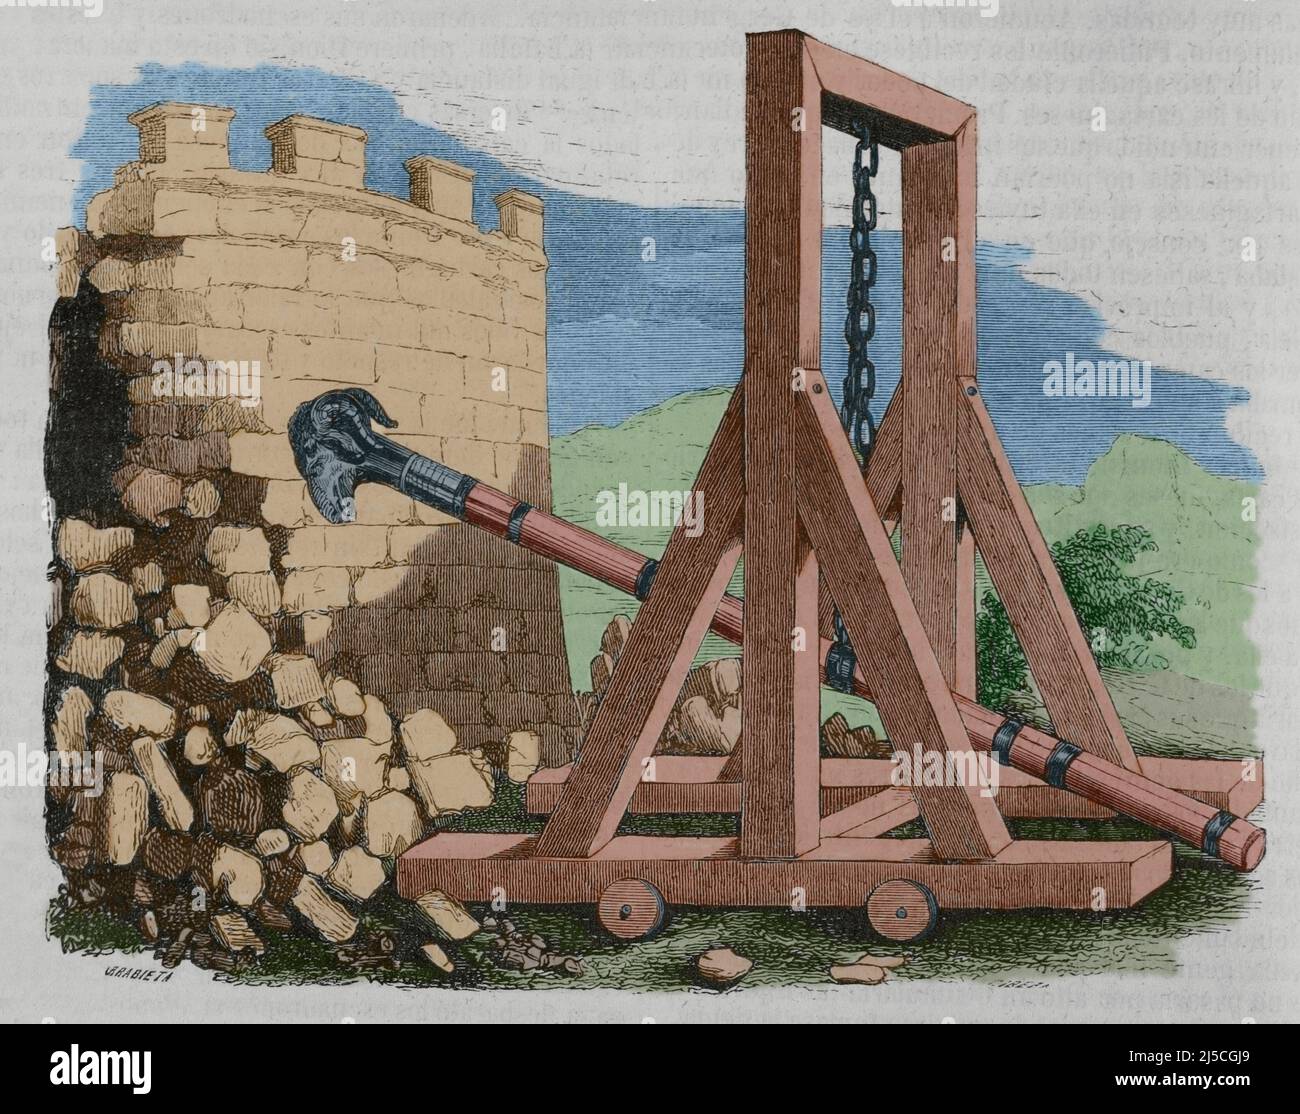 Ancient history. Battering ram. Siege weapon used to break open the masonry walls of fortifications or splinter their wooden gates. Engraving. Later colouration. Historia General de España by Father Mariana. Madrid, 1852. Stock Photo